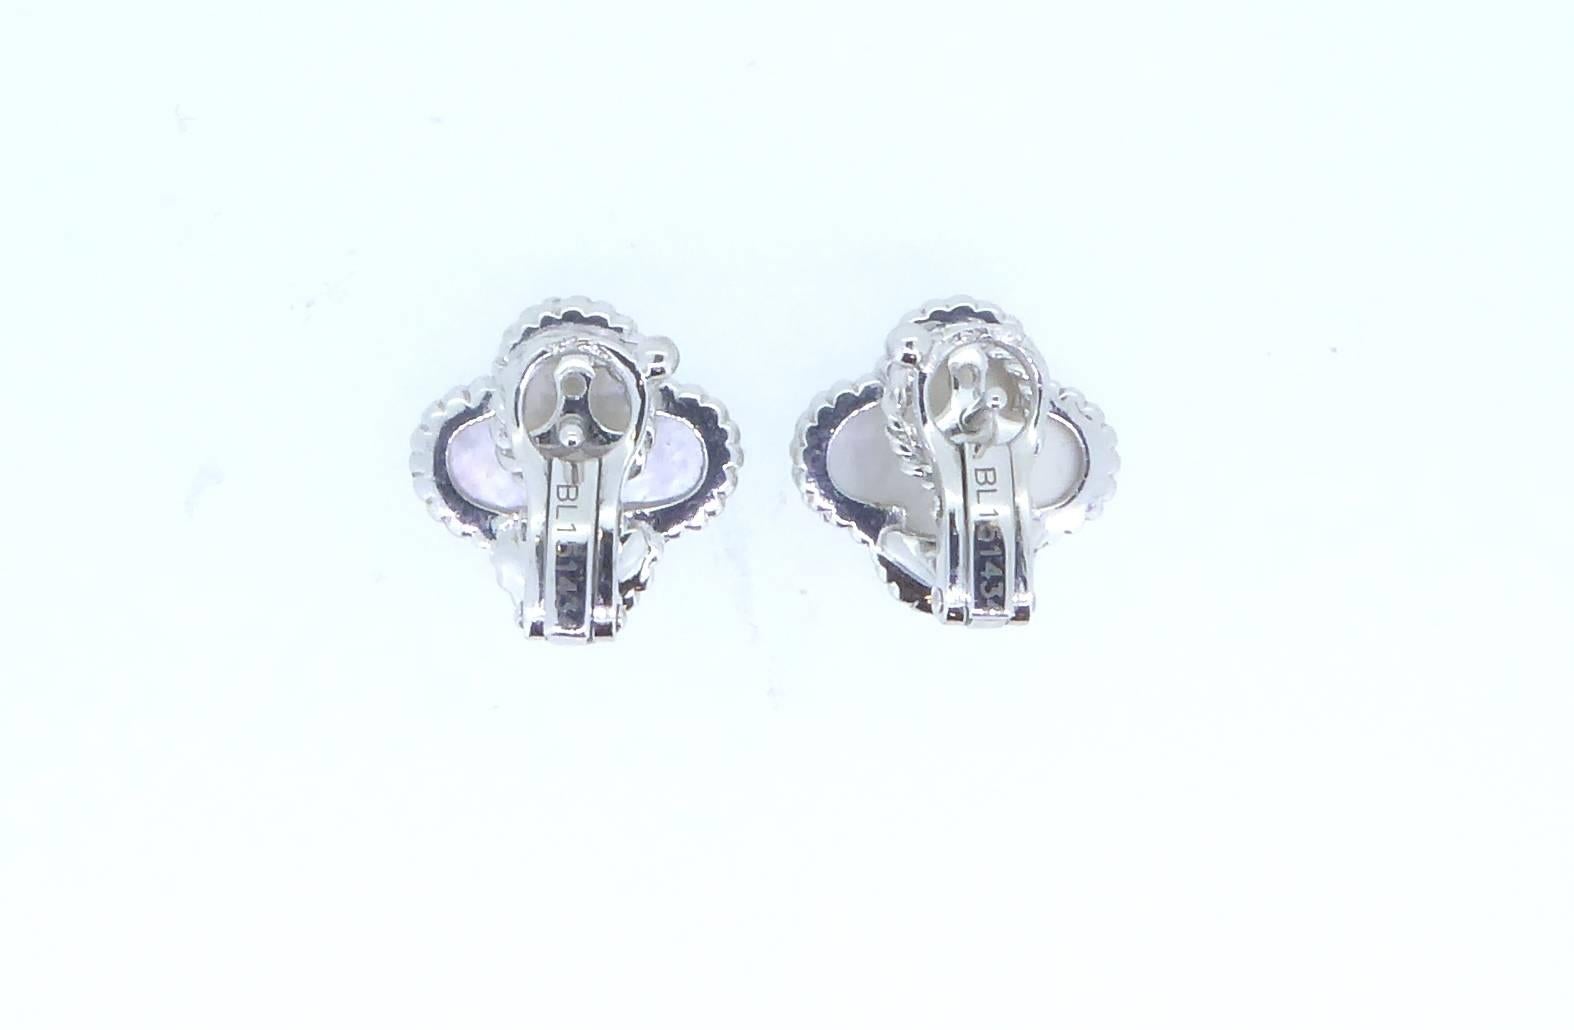 A pair of Van Cleef and Arpels Alhambra mother-of-pearl and 18ct white gold ear clips. Each ear clip with singular mother-of-pearl motif. Set in 18ct white gold. Each clip marked "VCA" "750" and "BL 151434". With French